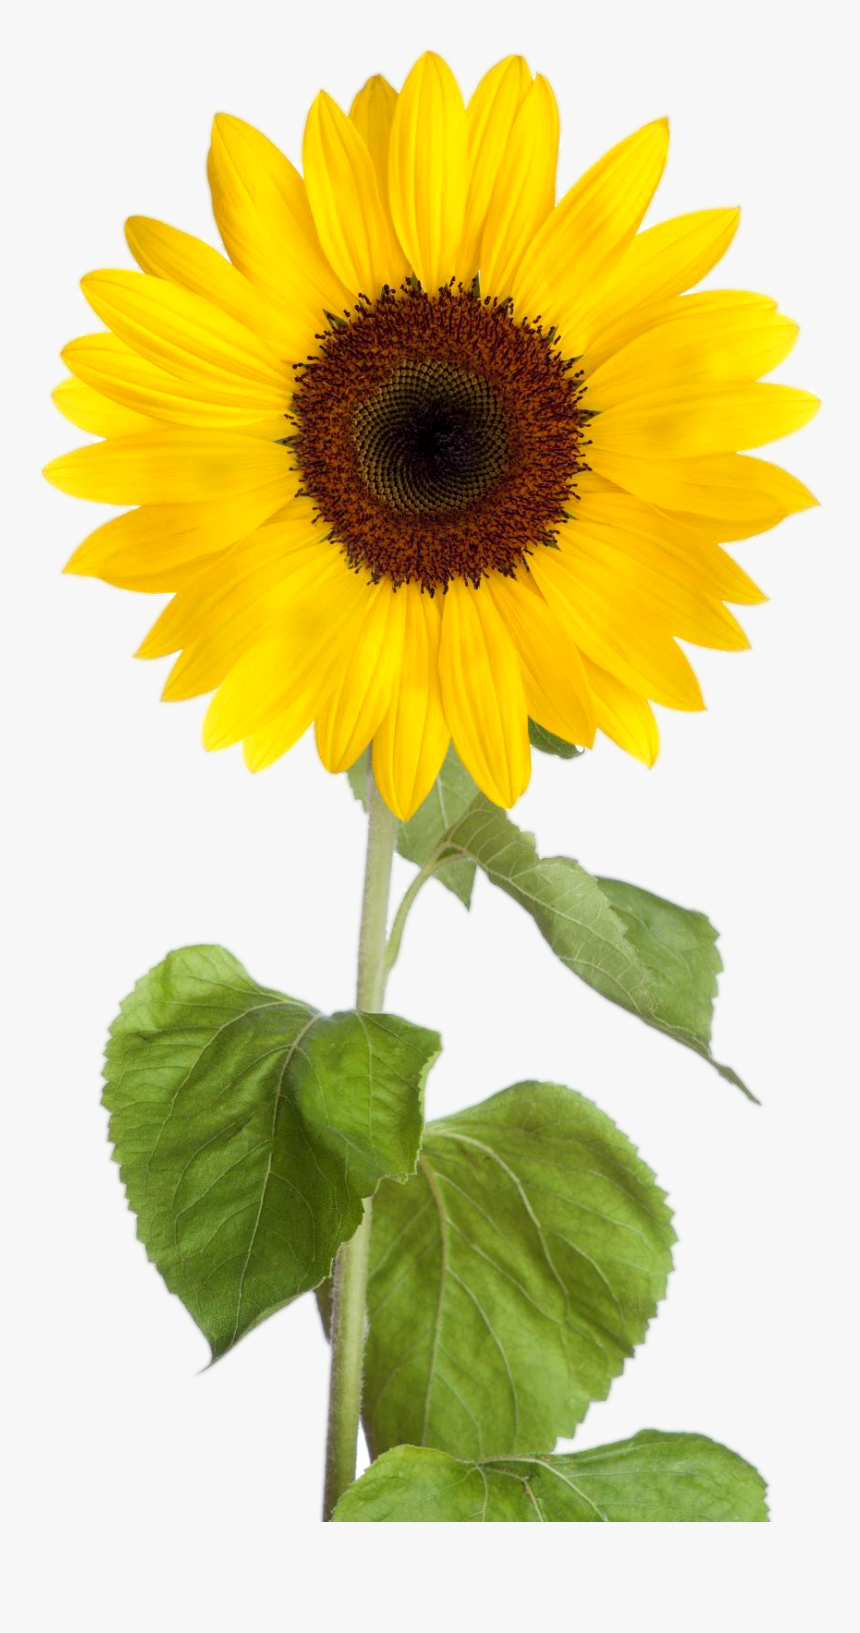 Sunflower Clipart - Transparent Background Sunflower Clipart, HD Png Download, Free Download